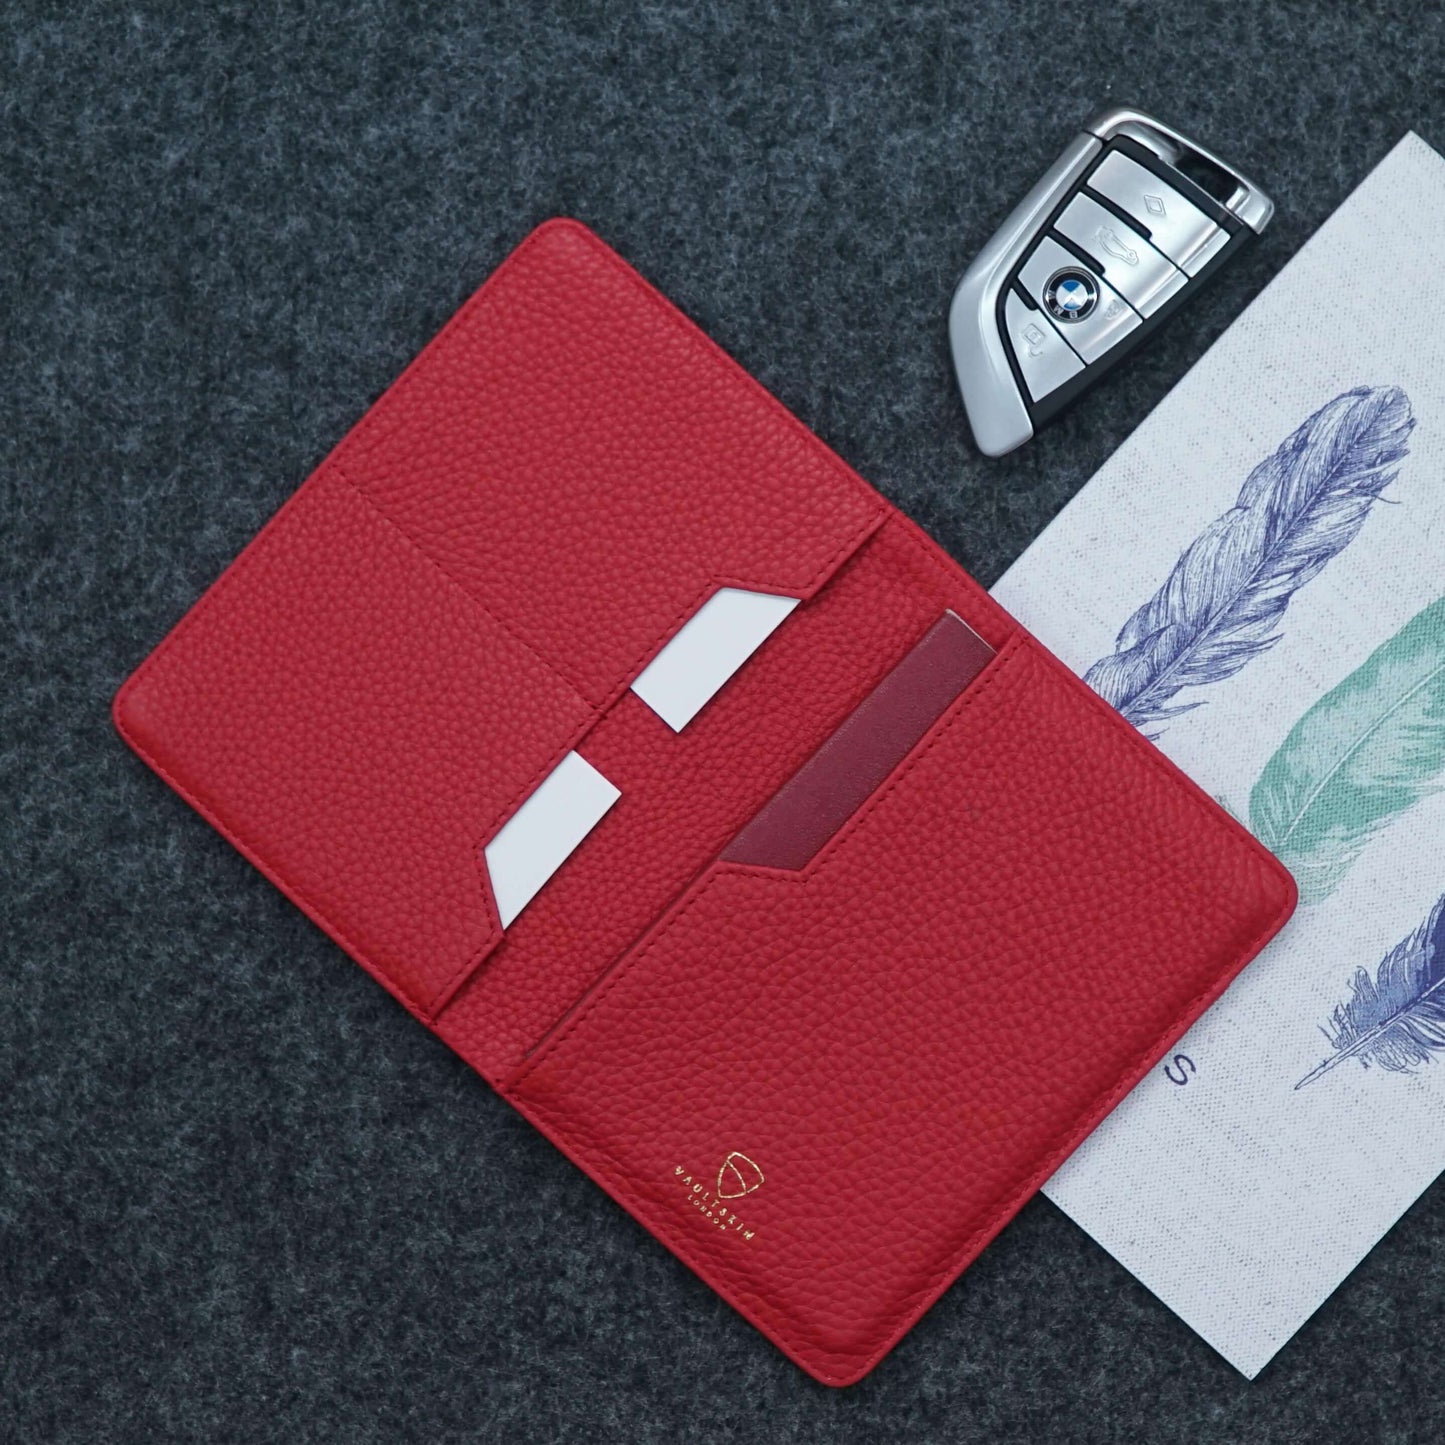 Durability and style passport case